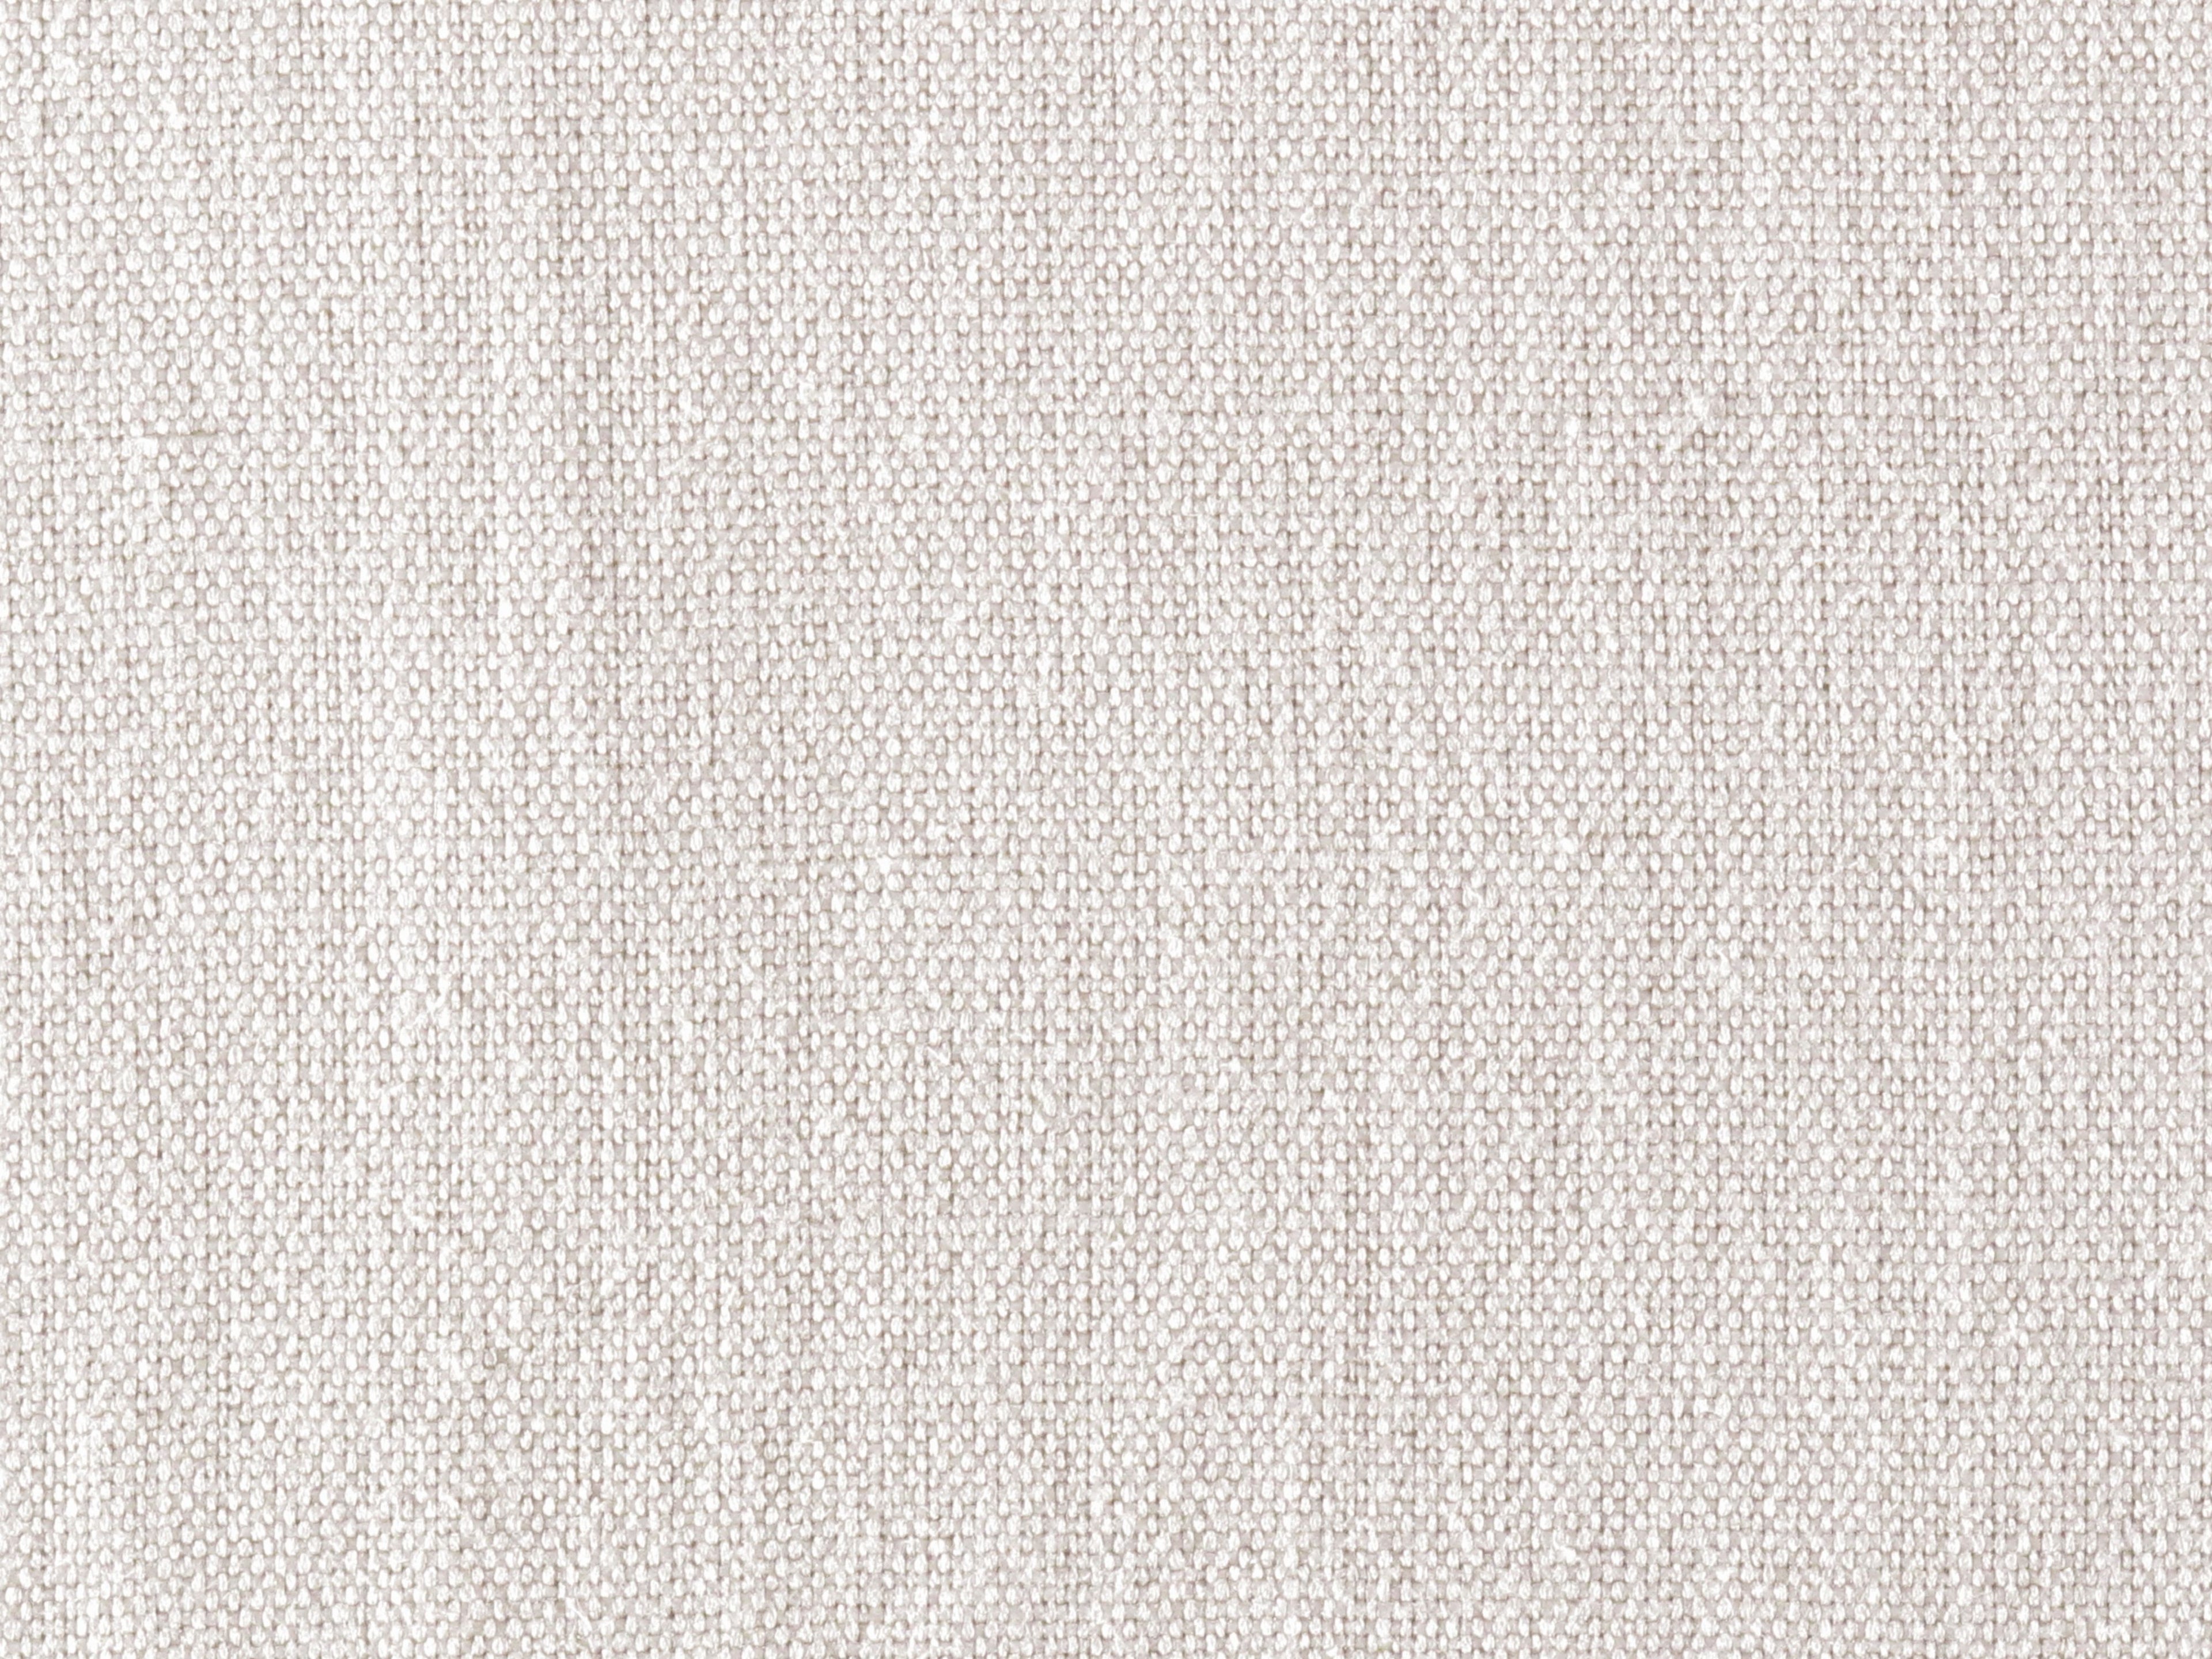 Lakeside Linen fabric in platinum color - pattern number PK 0019LAKE - by Scalamandre in the Old World Weavers collection